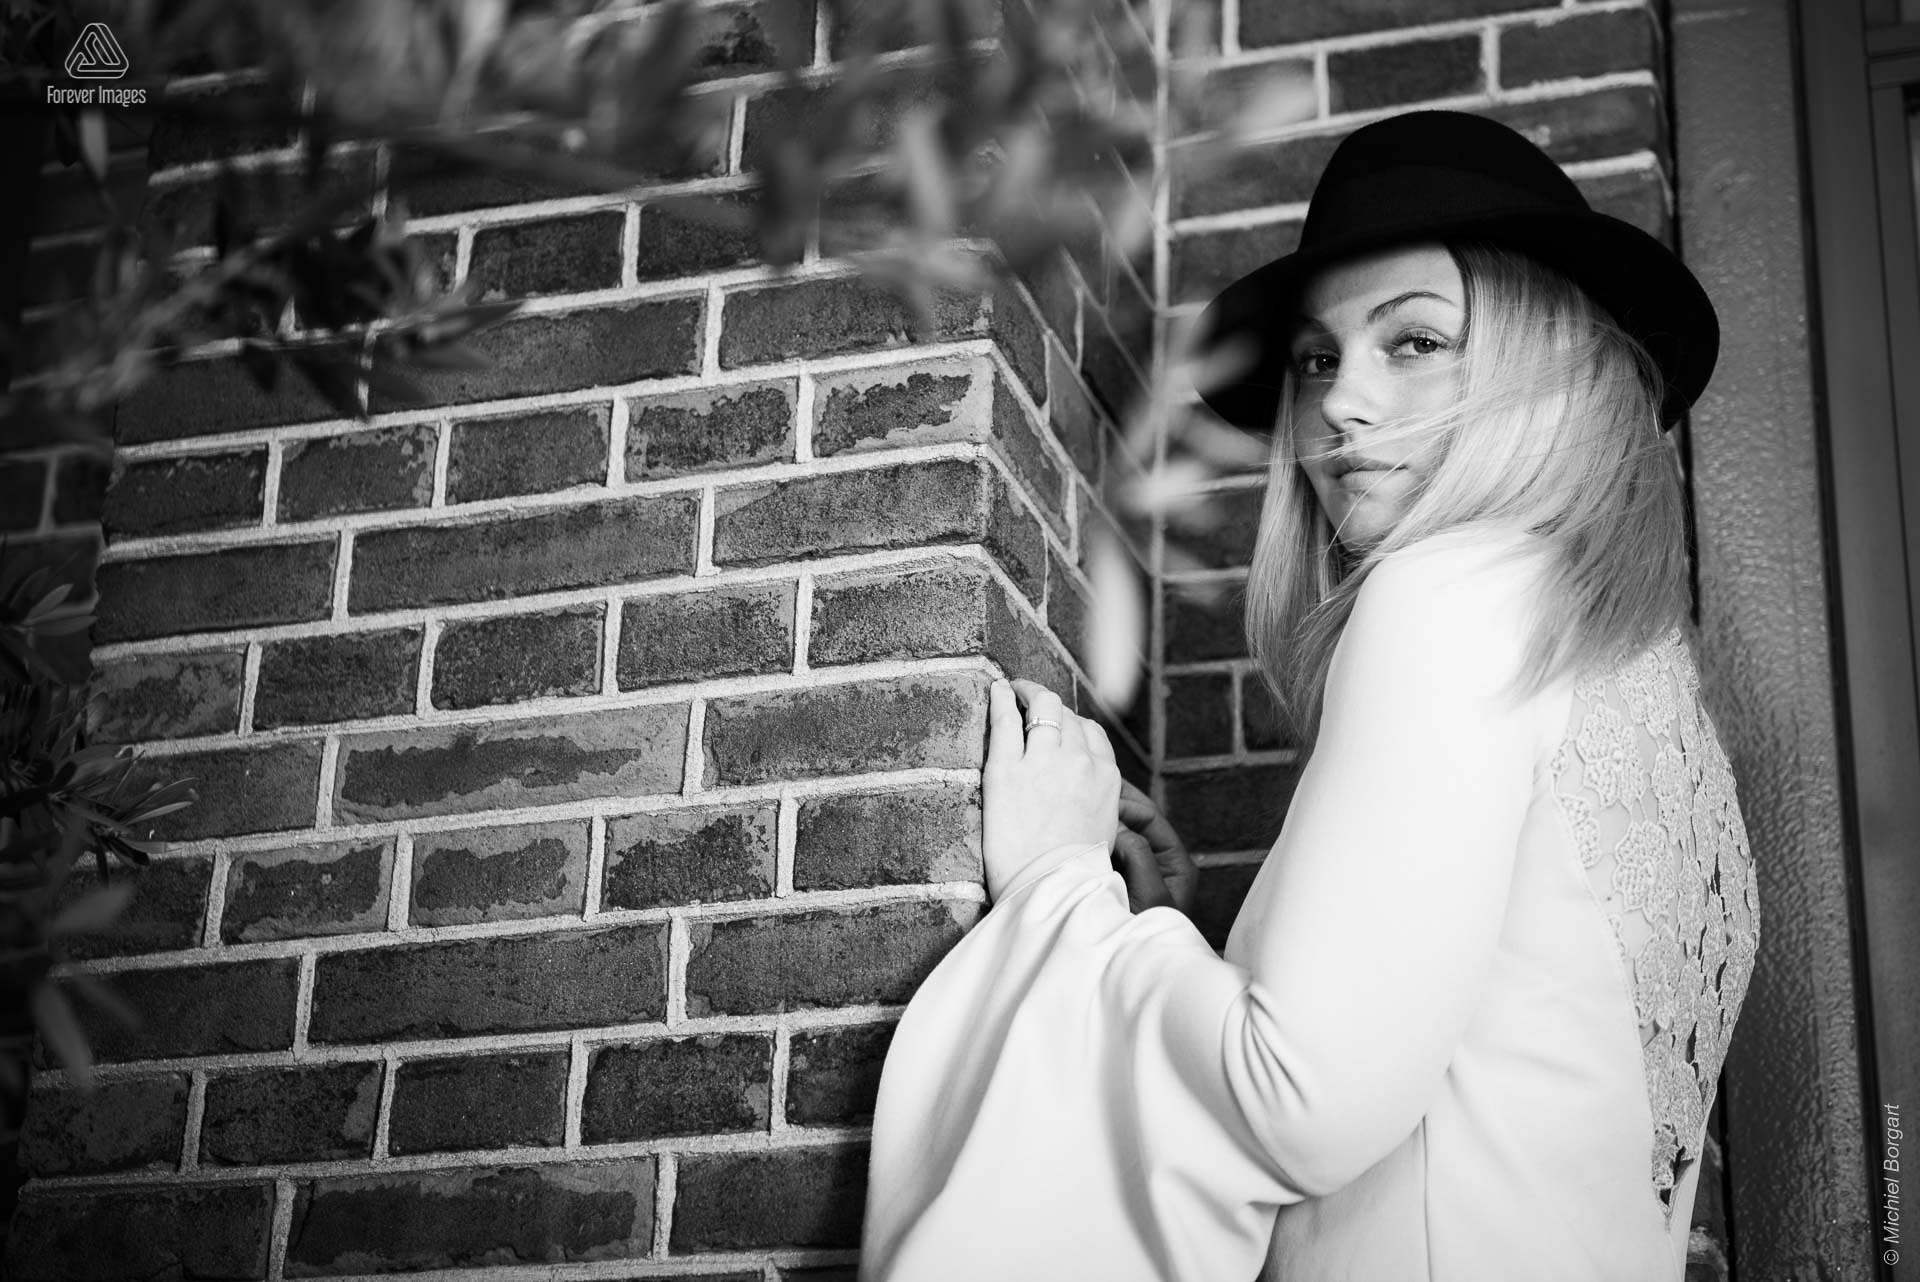 Portrait photo black and white young lady sheltered in the wind with black hat | Porscha Luna de Jong Happyhappyjoyjoy | Portrait Photographer Michiel Borgart - Forever Images.